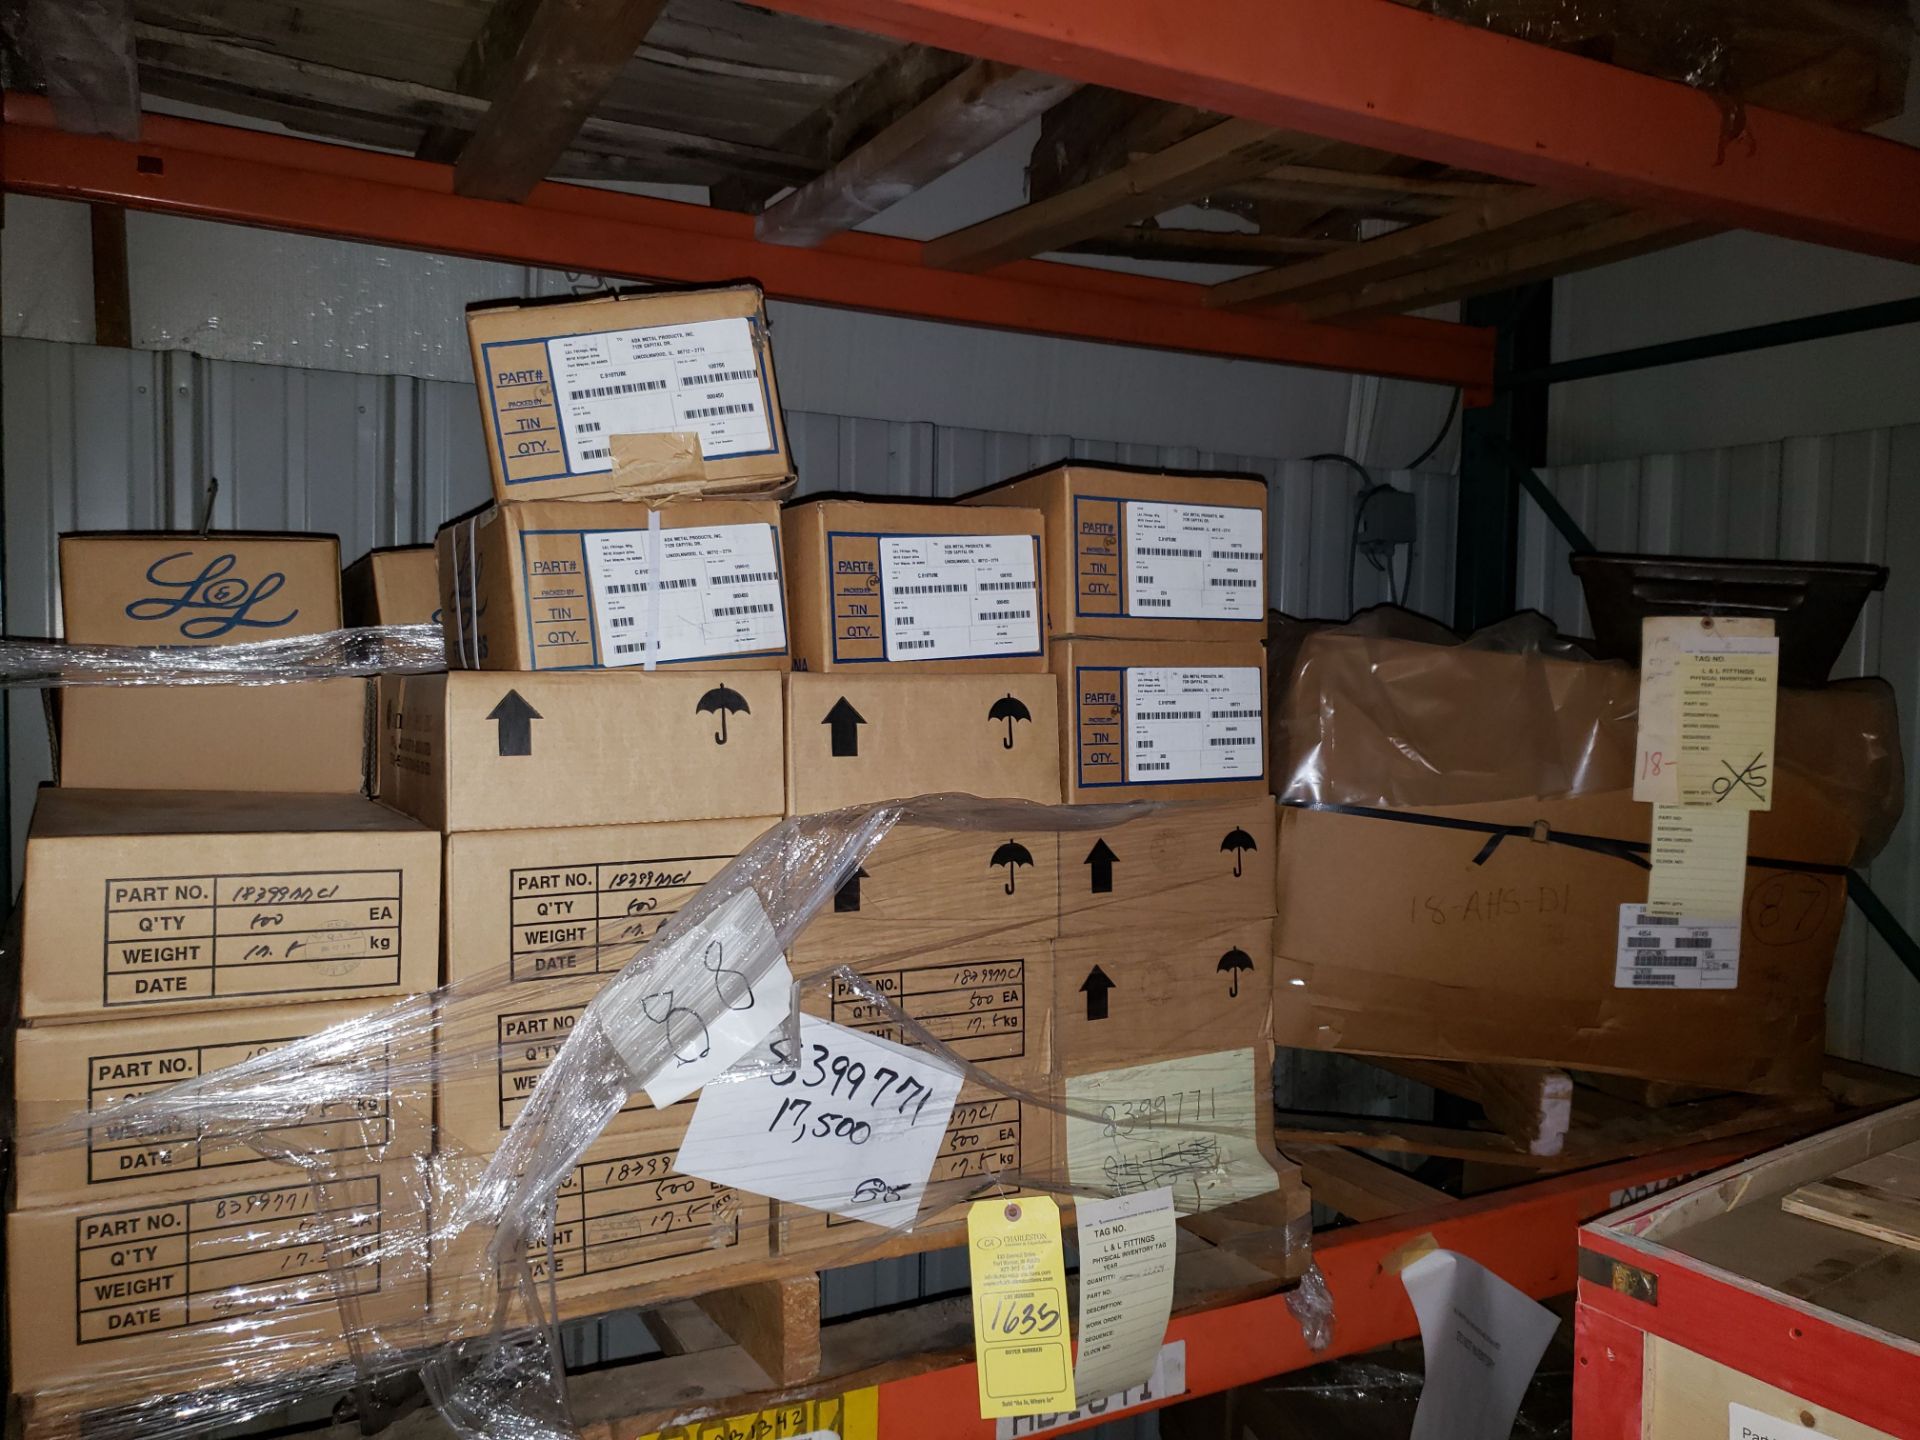 VARIOUS L&L FITTINGS INVENTORY (LOCATED AT: 9910 AIRPORT DRIVE, FORT WAYNE, IN 46809)